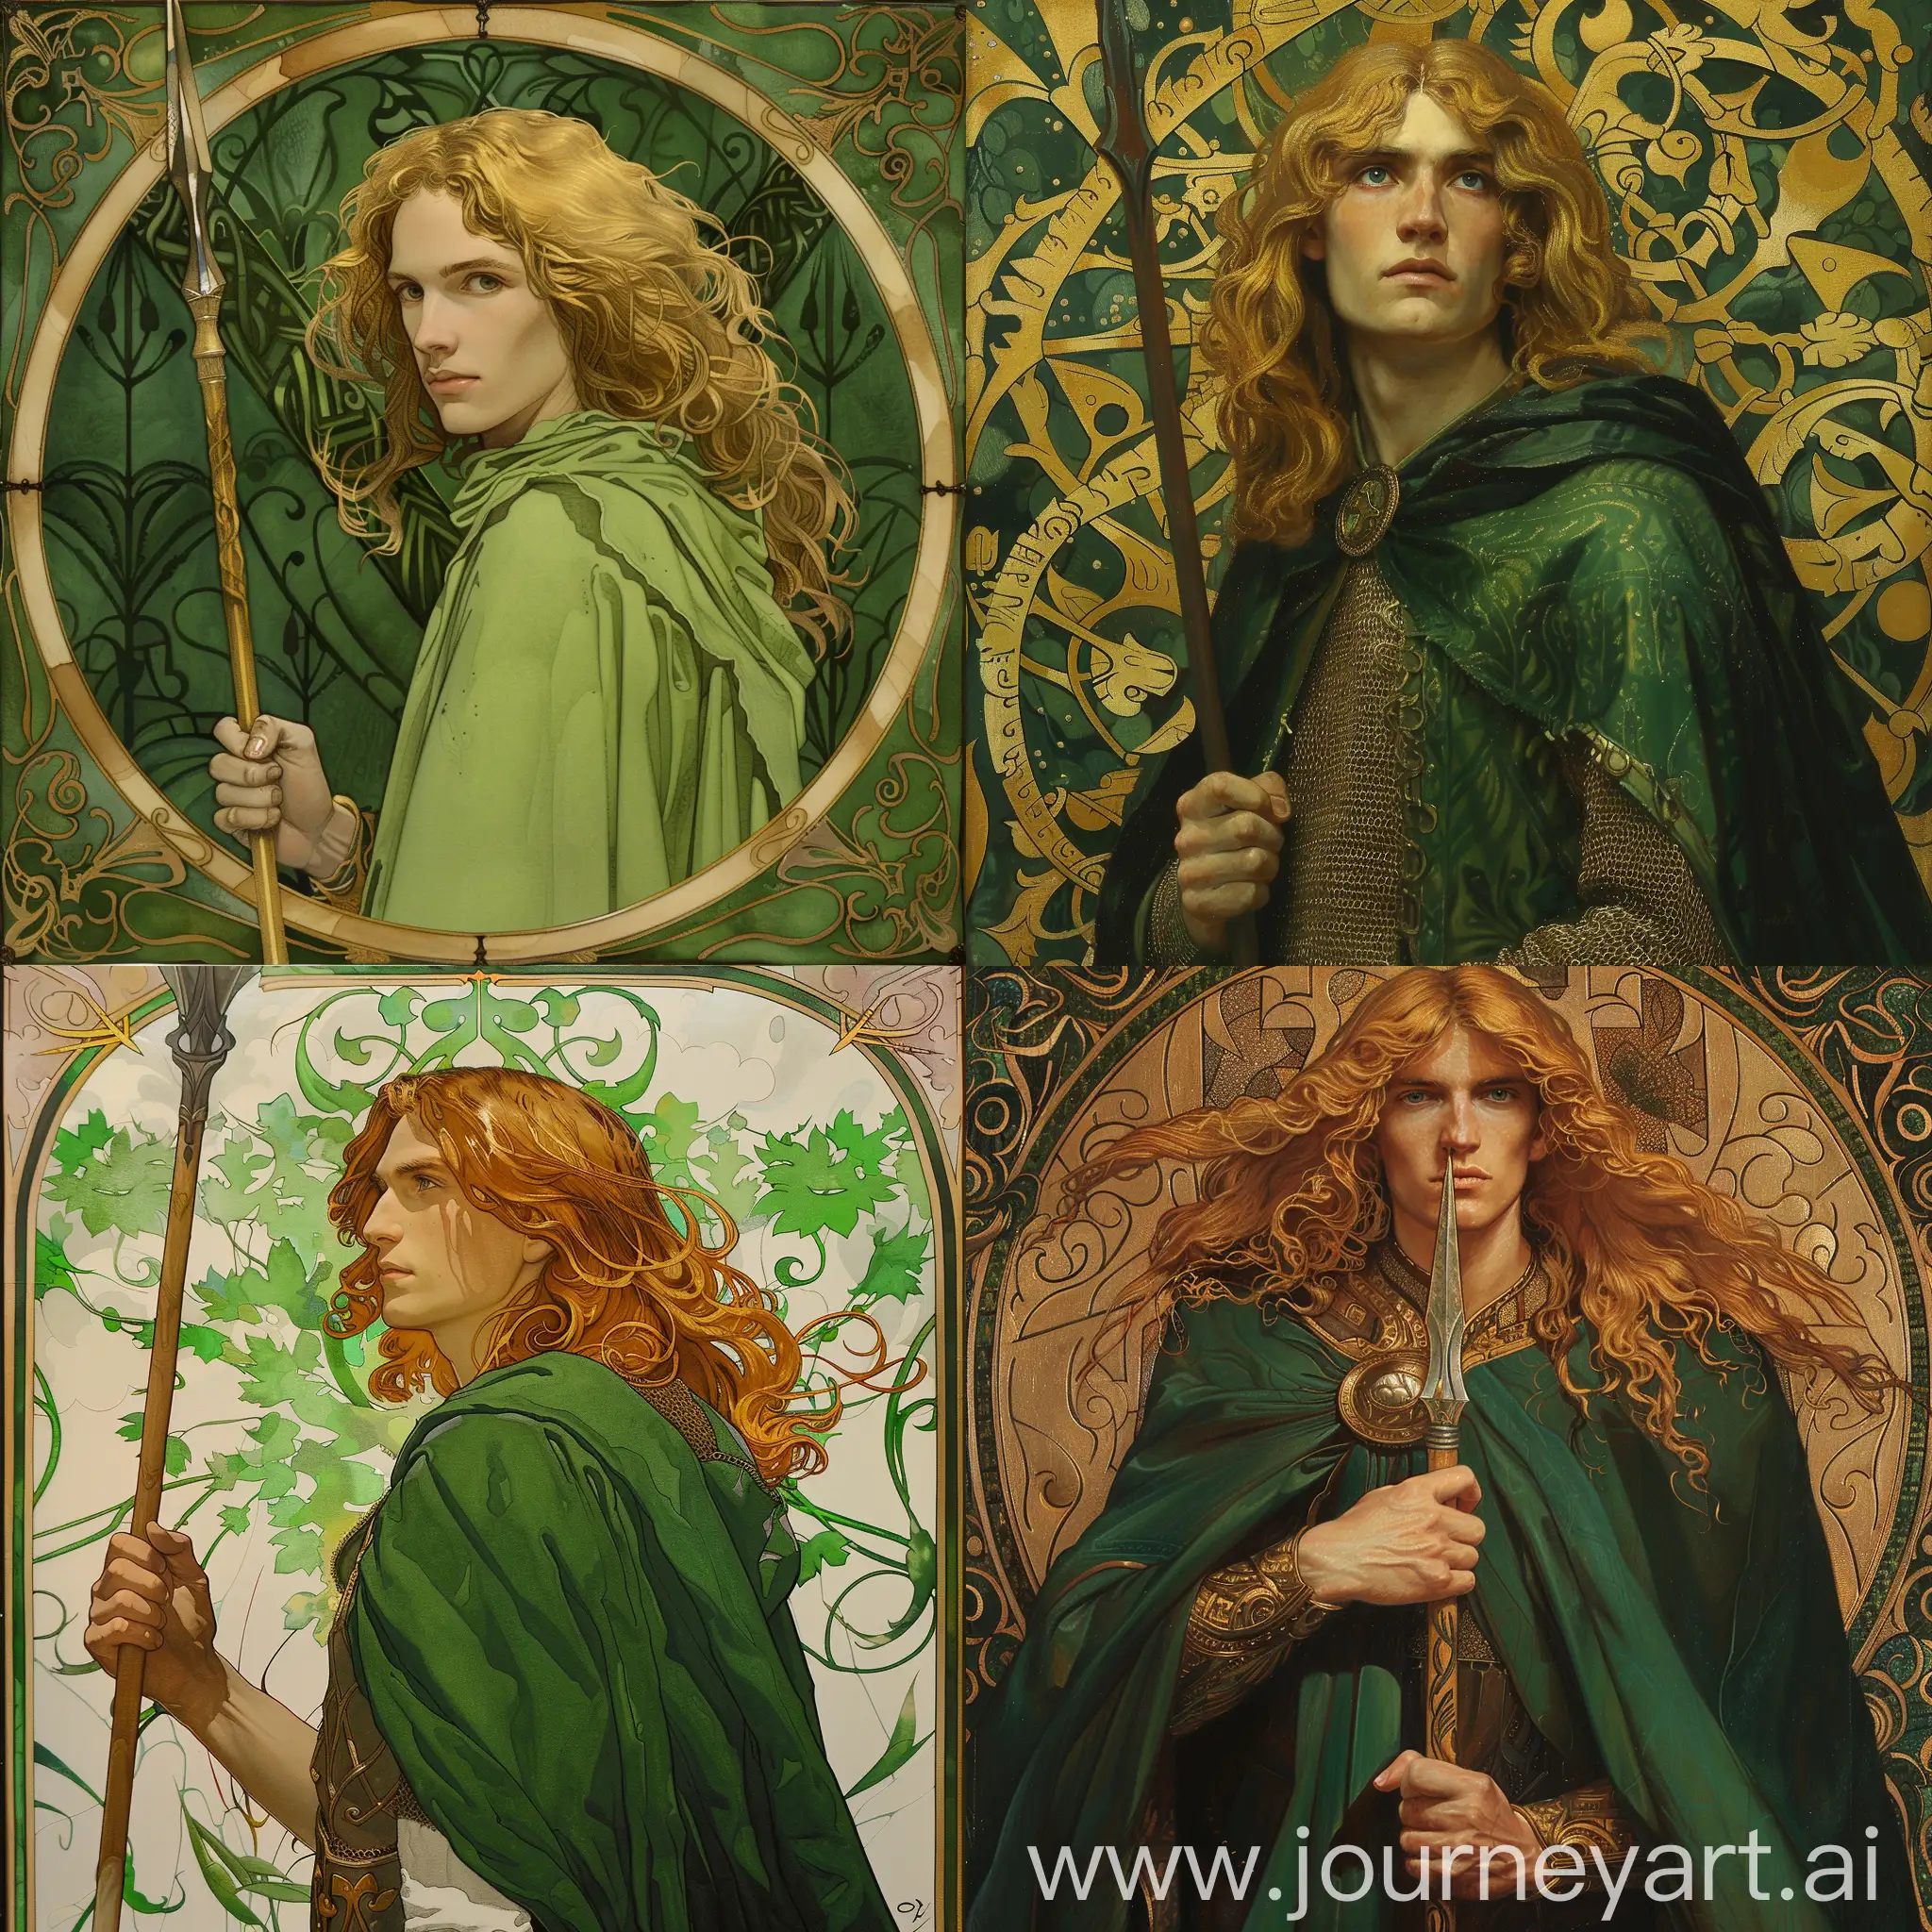 Young-Man-with-Long-Golden-Hair-in-Green-Mantle-with-Spear-Art-Nouveau